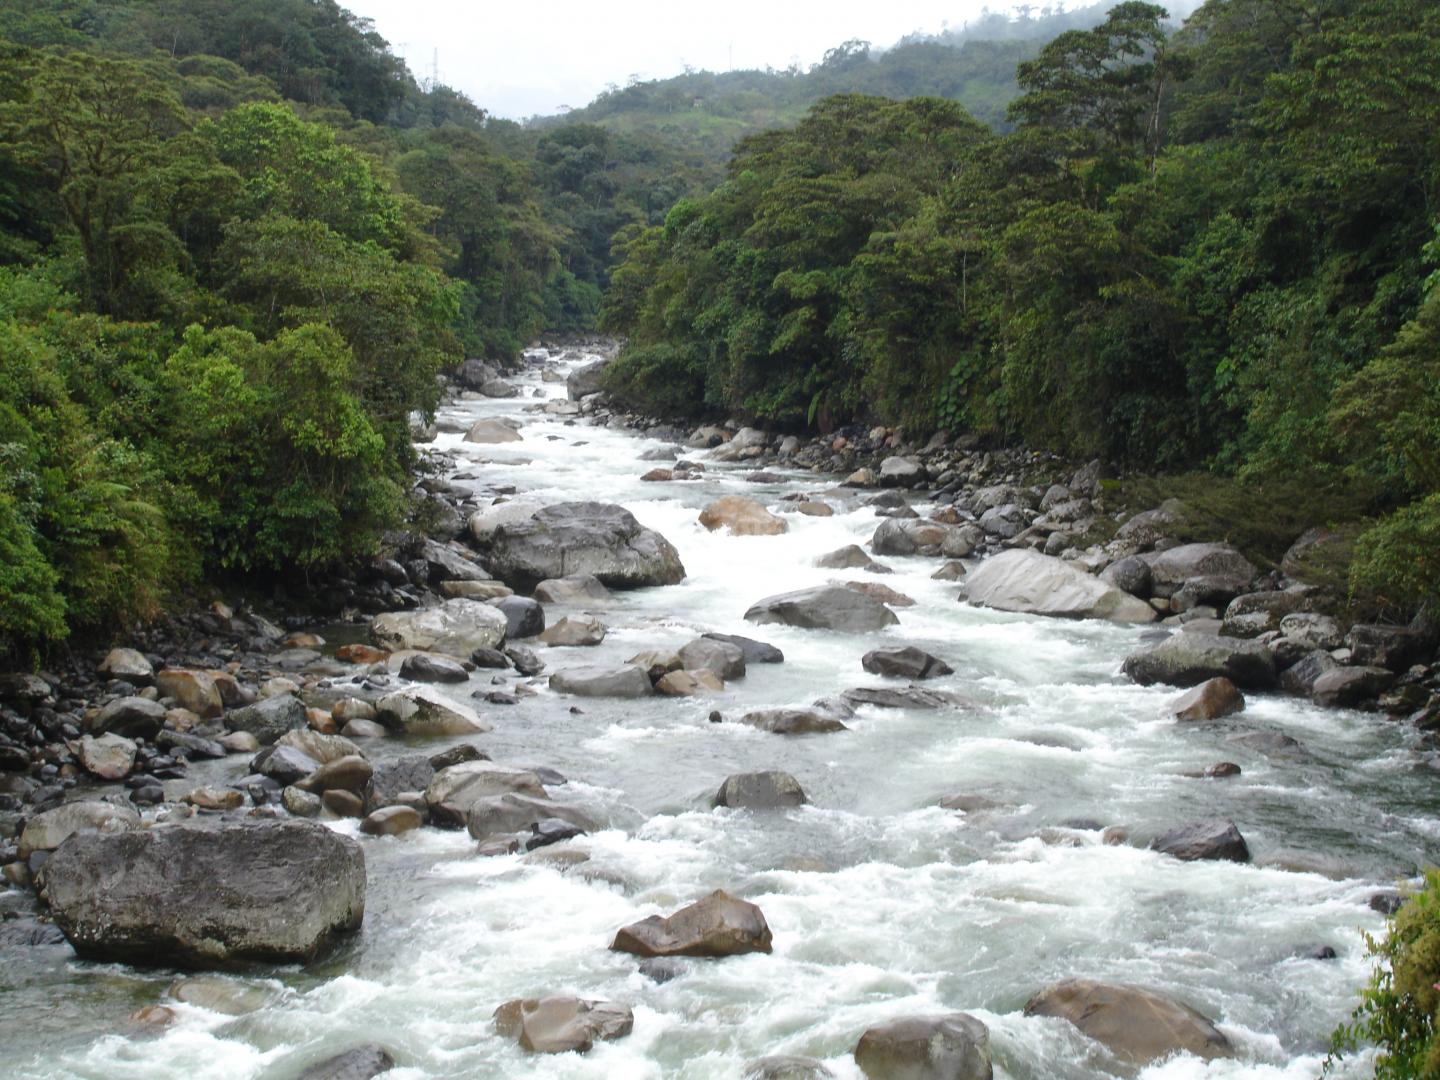 The Influence of Hydropower Dams on River Connectivity in the Andes Amazon